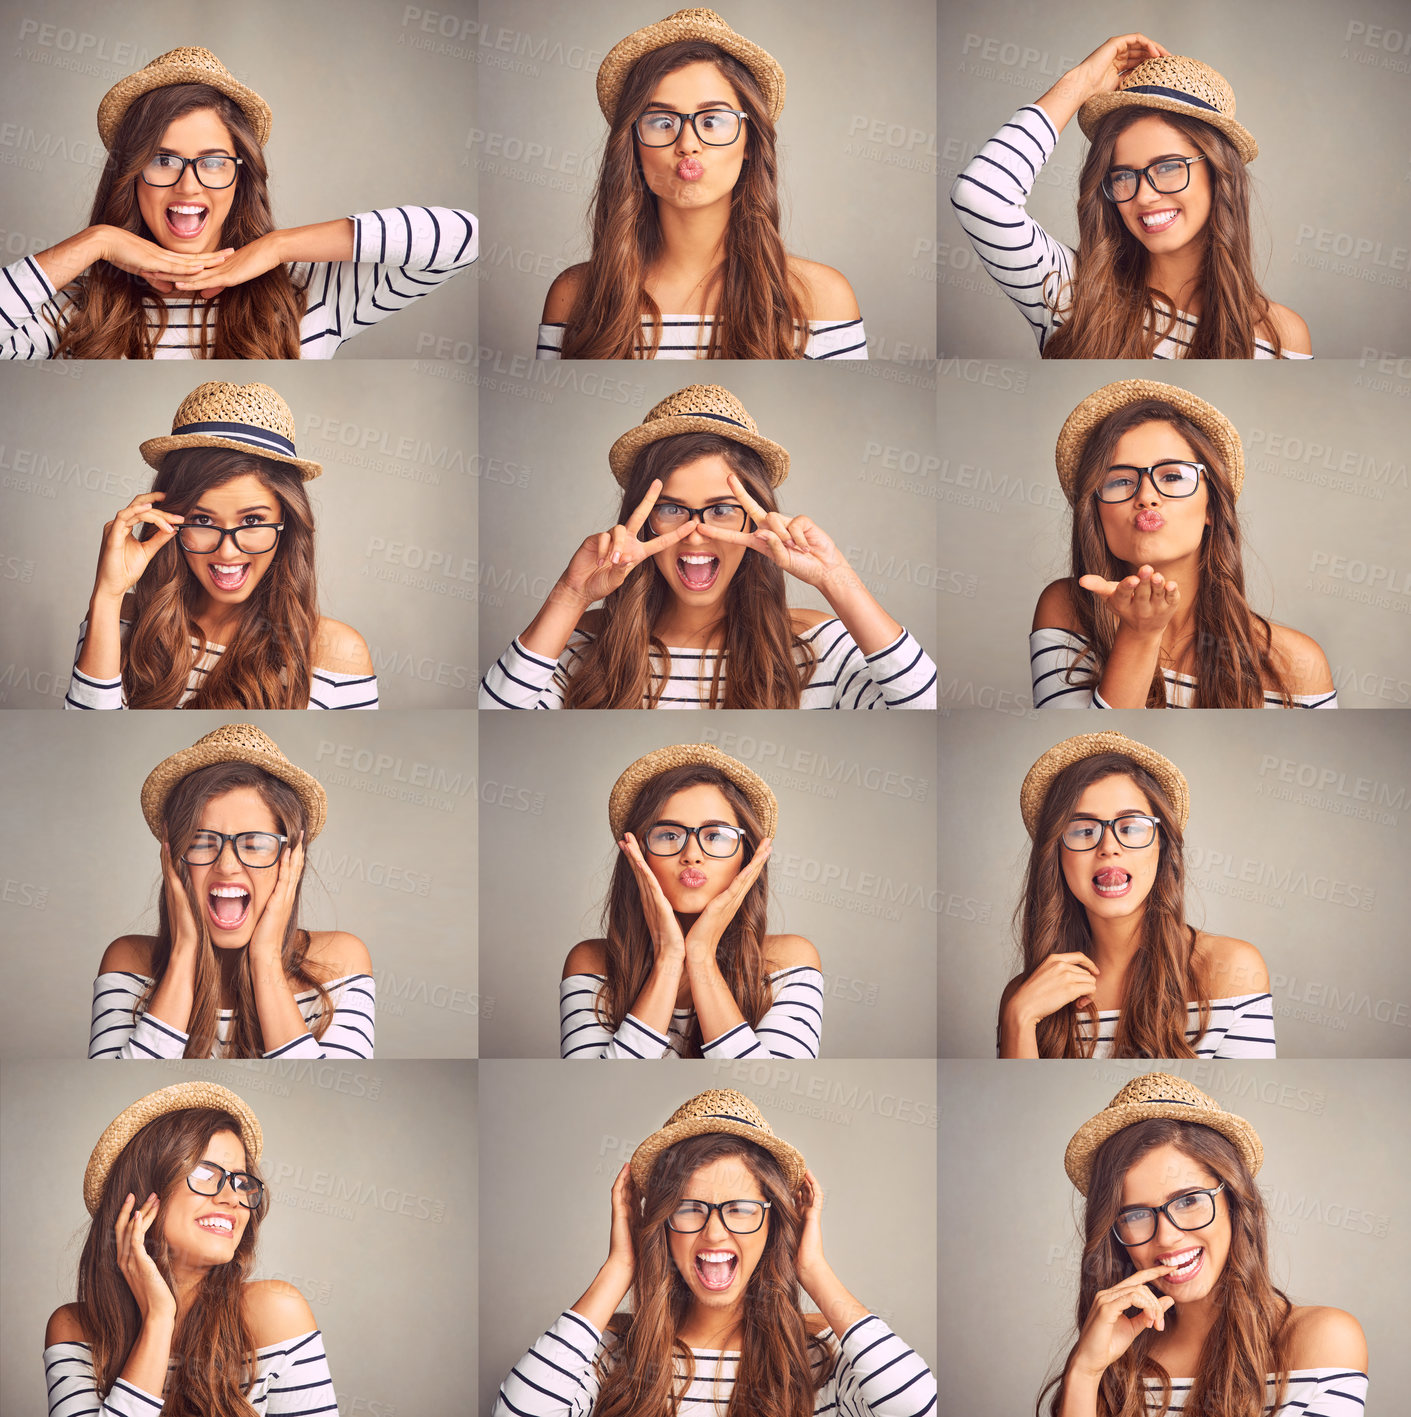 Buy stock photo Composite studio image of an attractive young woman making various facial expressions against a gray background